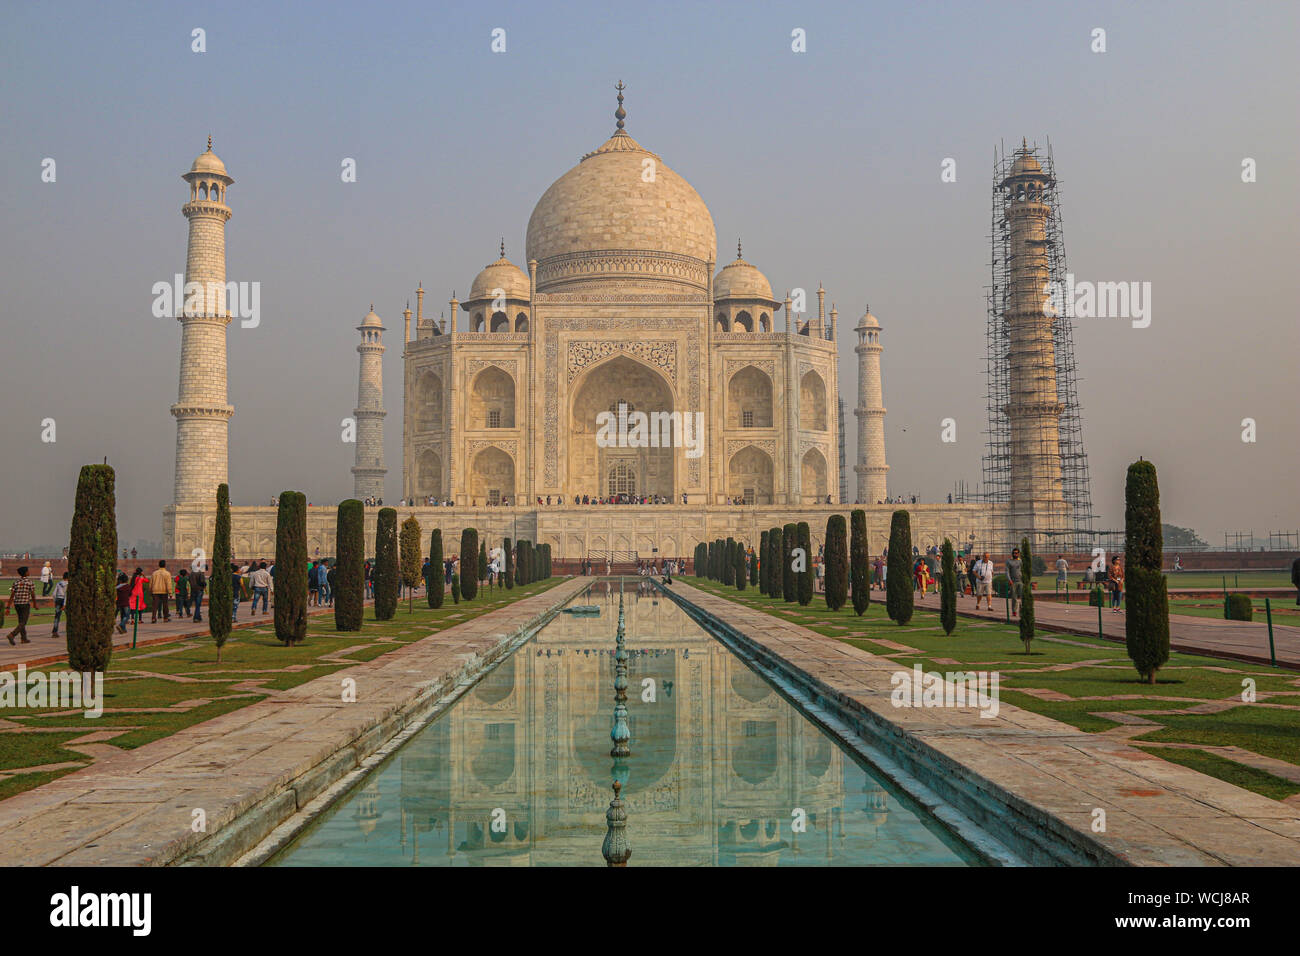 The Iconic And Beautiful Exterior Of The Taj Mahal The Most Famous